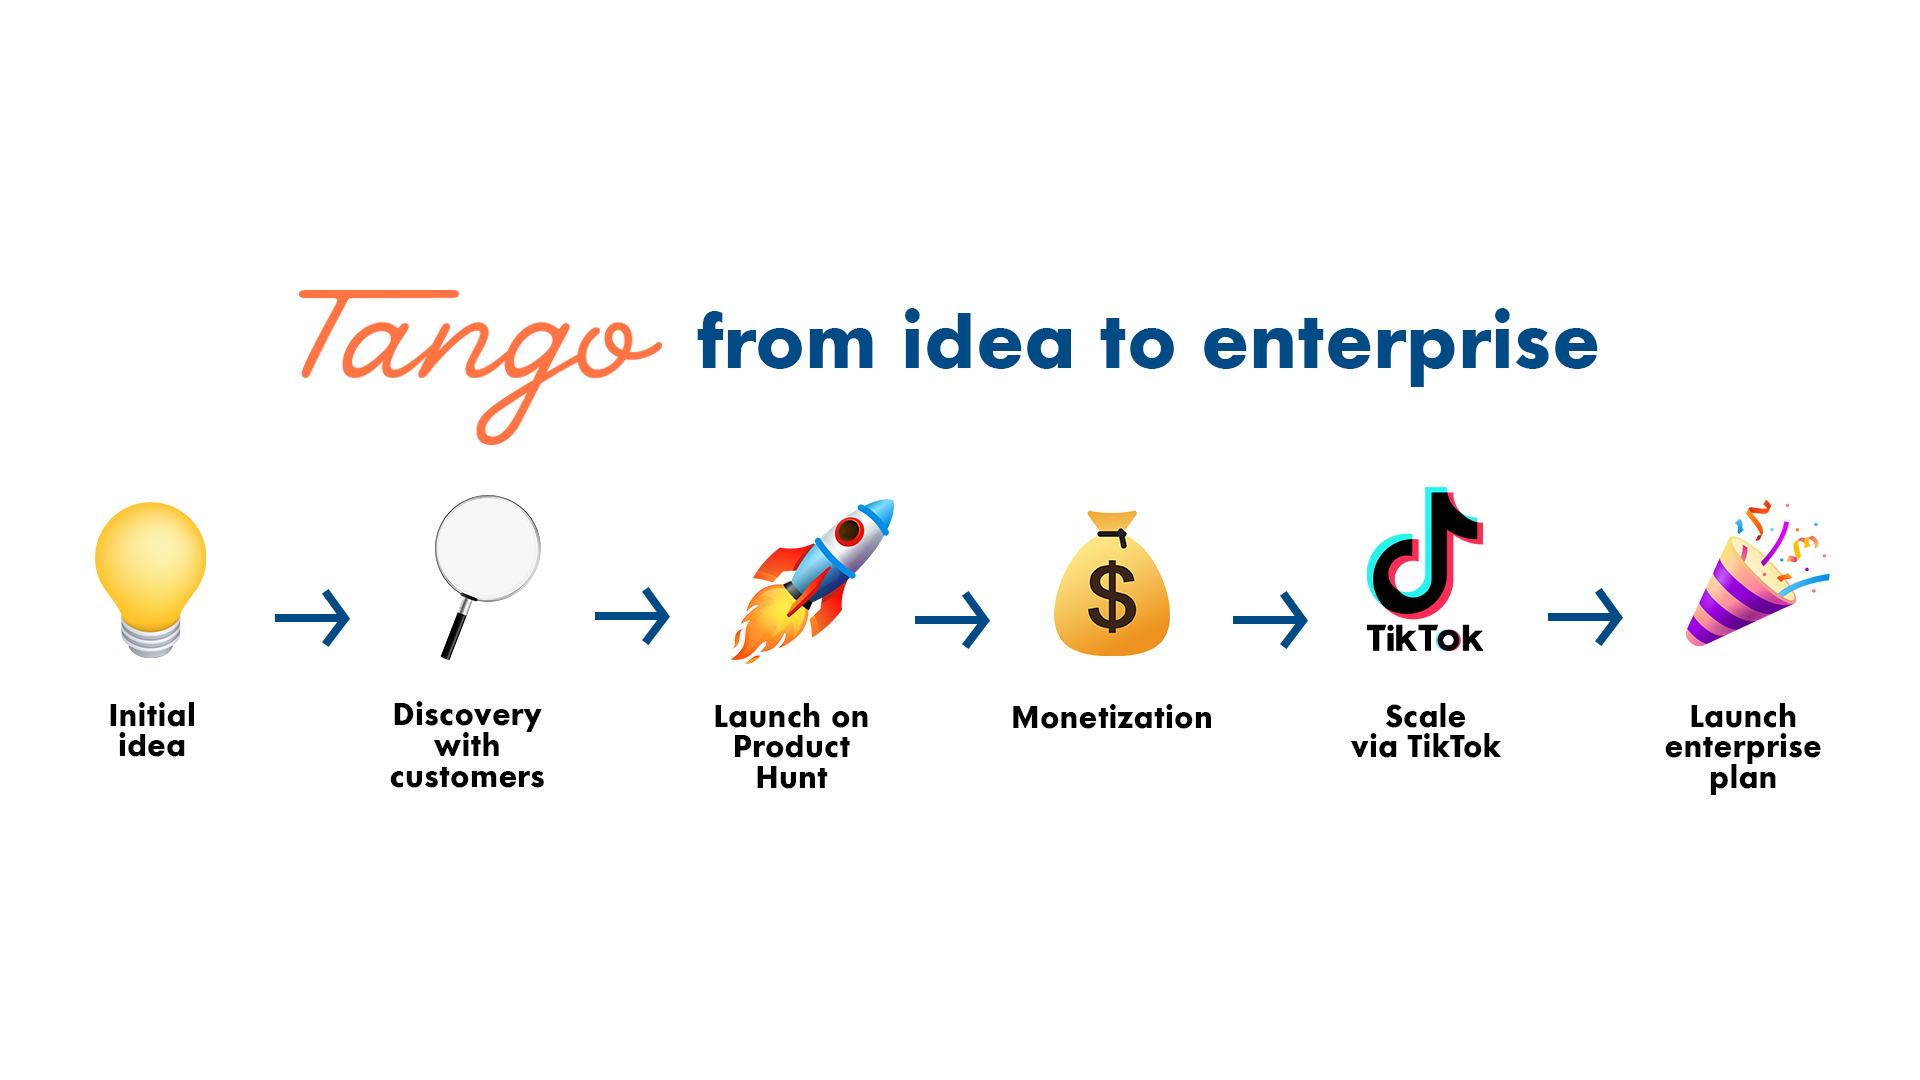 Illustrated timeline showing how the startup Tango went from idea to an enterprise.